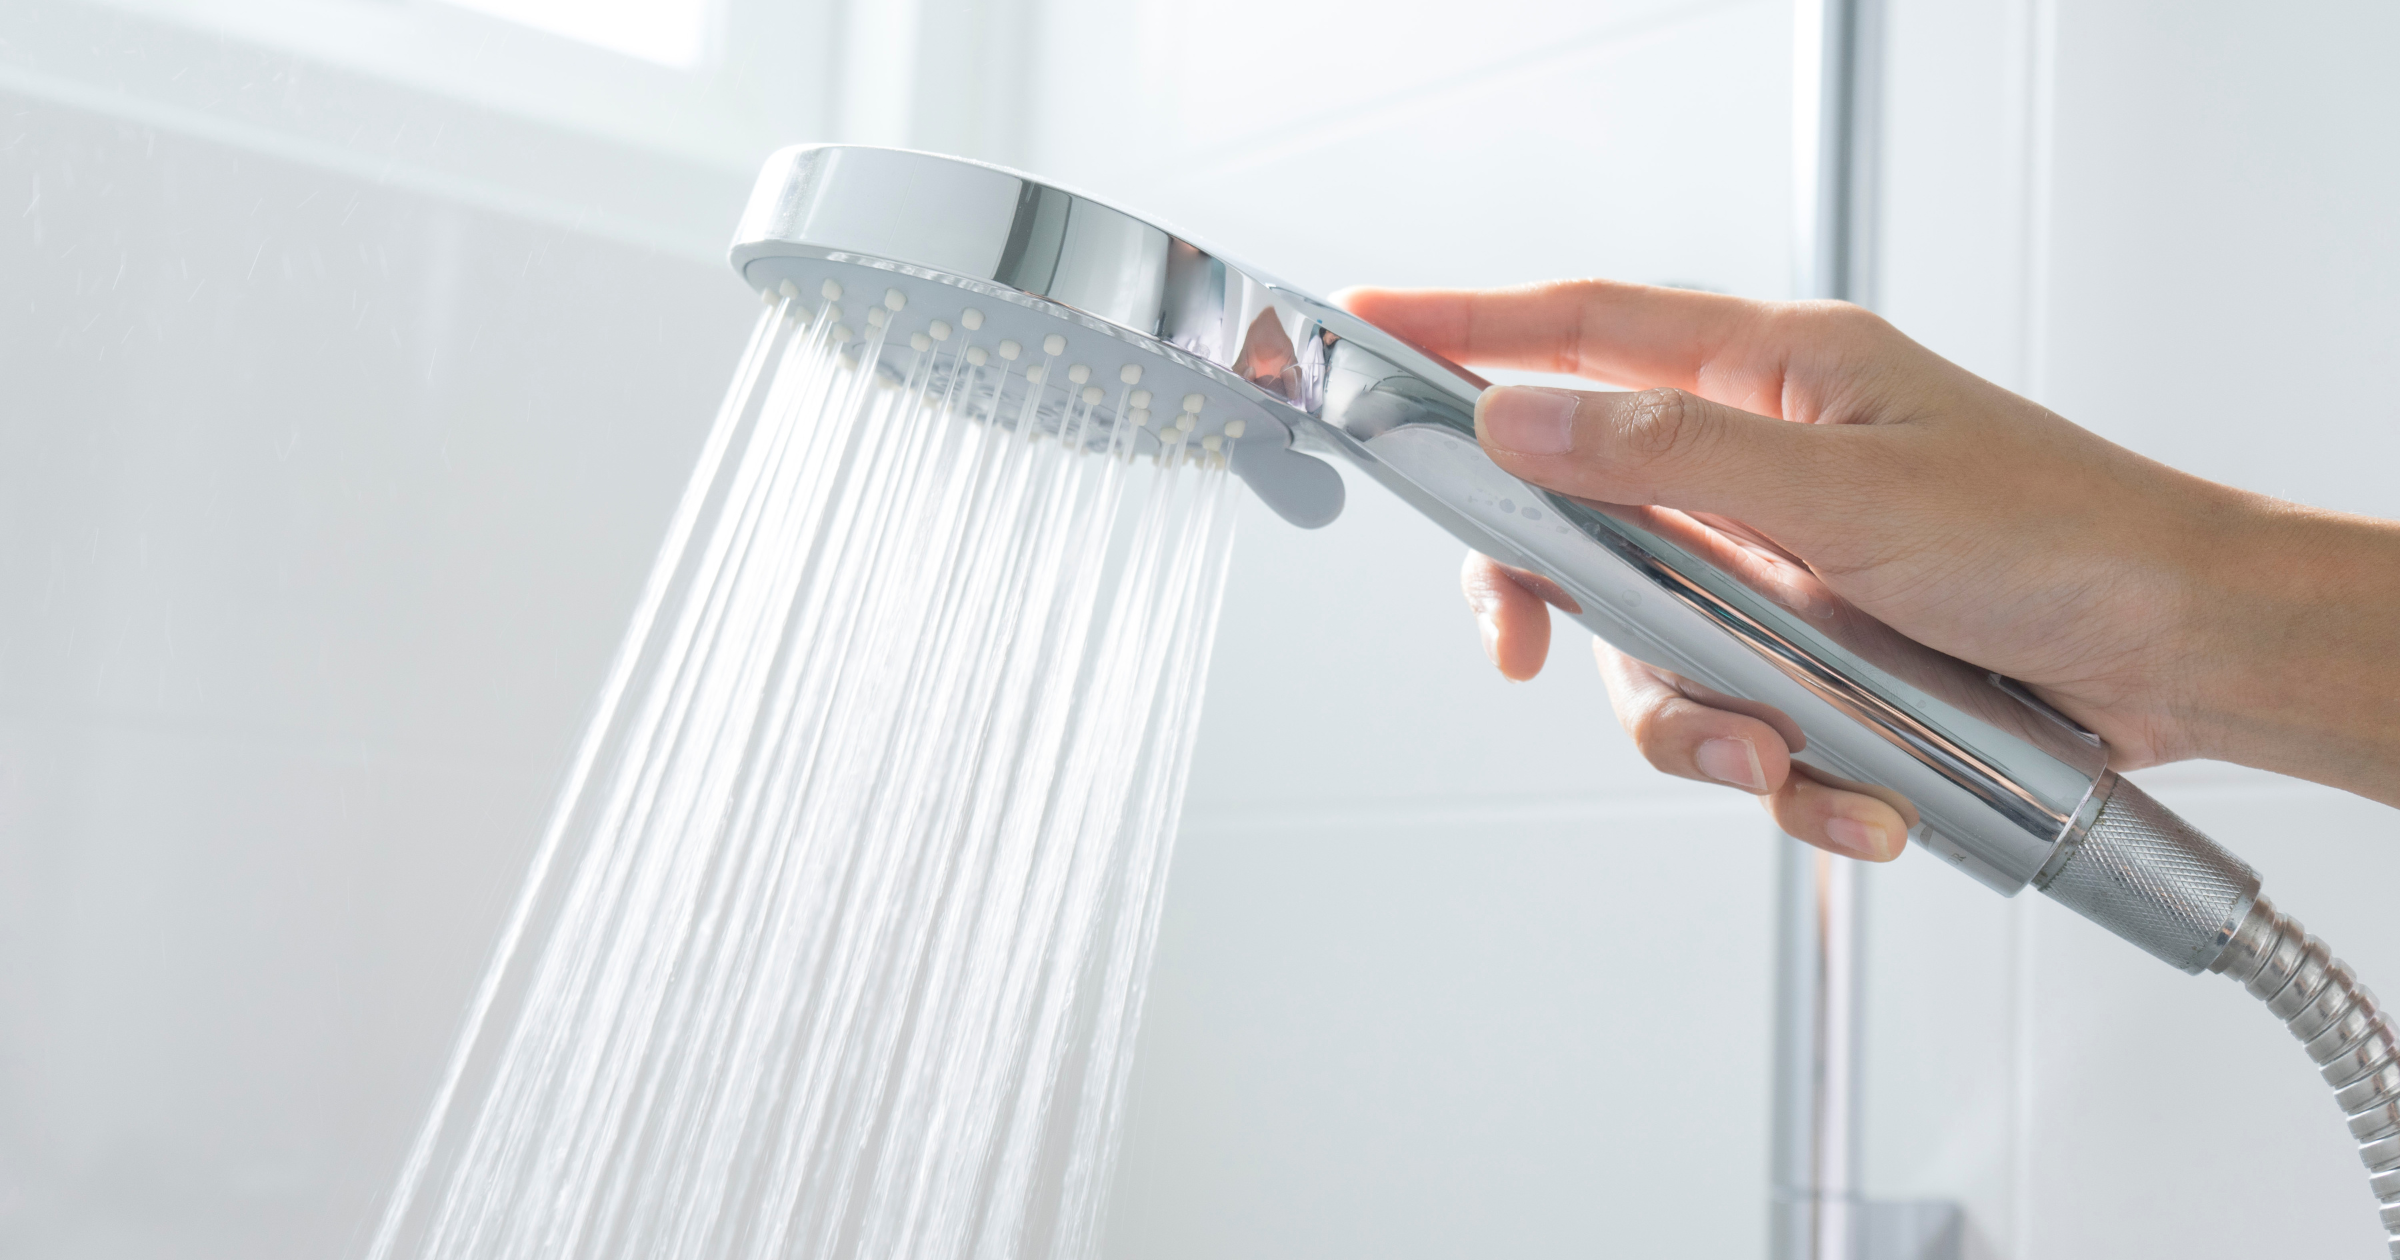 A stock image of a shower head  - start your property search on Share to Buy! 